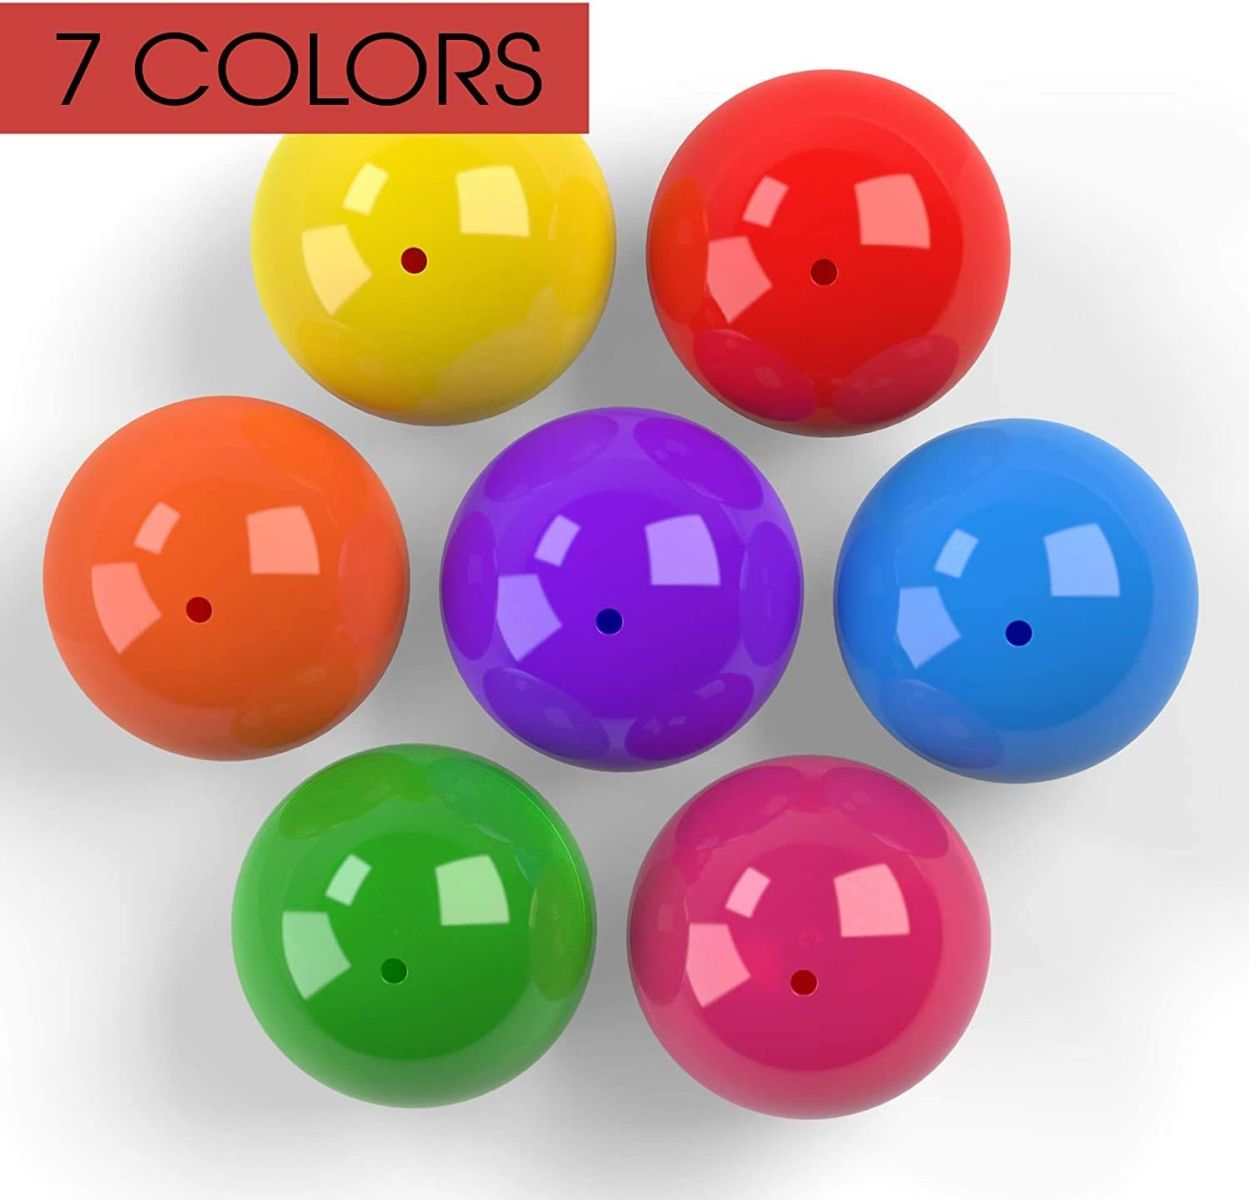 Empty Colored Round Capsules 2 inch 50 pcs Bulk 7 Colors Capsule for Gumball Machines Plastic Containers 50 mm